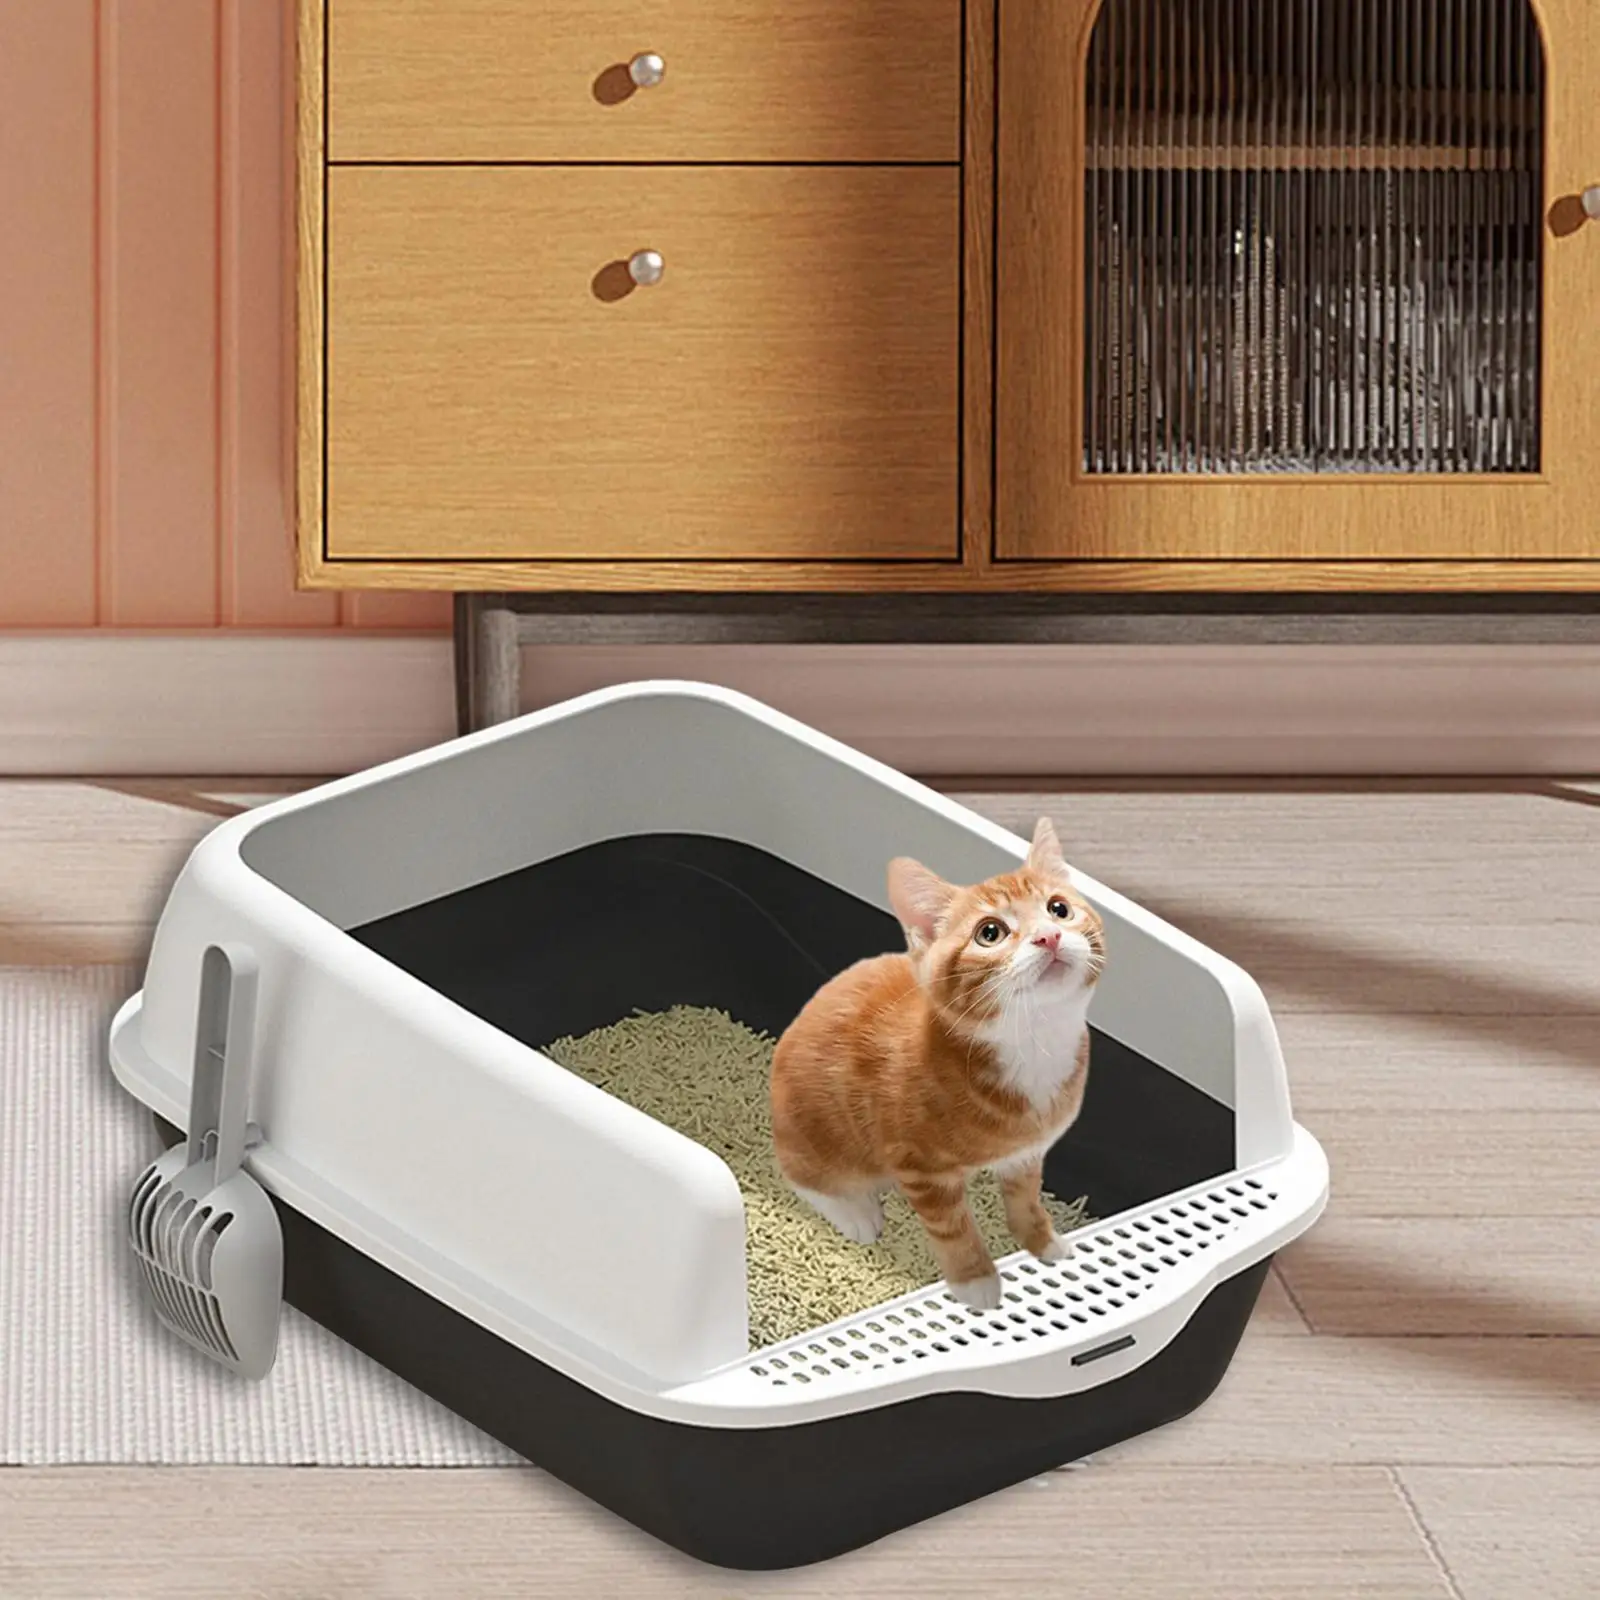 Cat Litter Tray Cat Bedpan Tall Heighten Anti Splashing Easy to Clean Supplies Detachable Semi Closed Cat Toilet